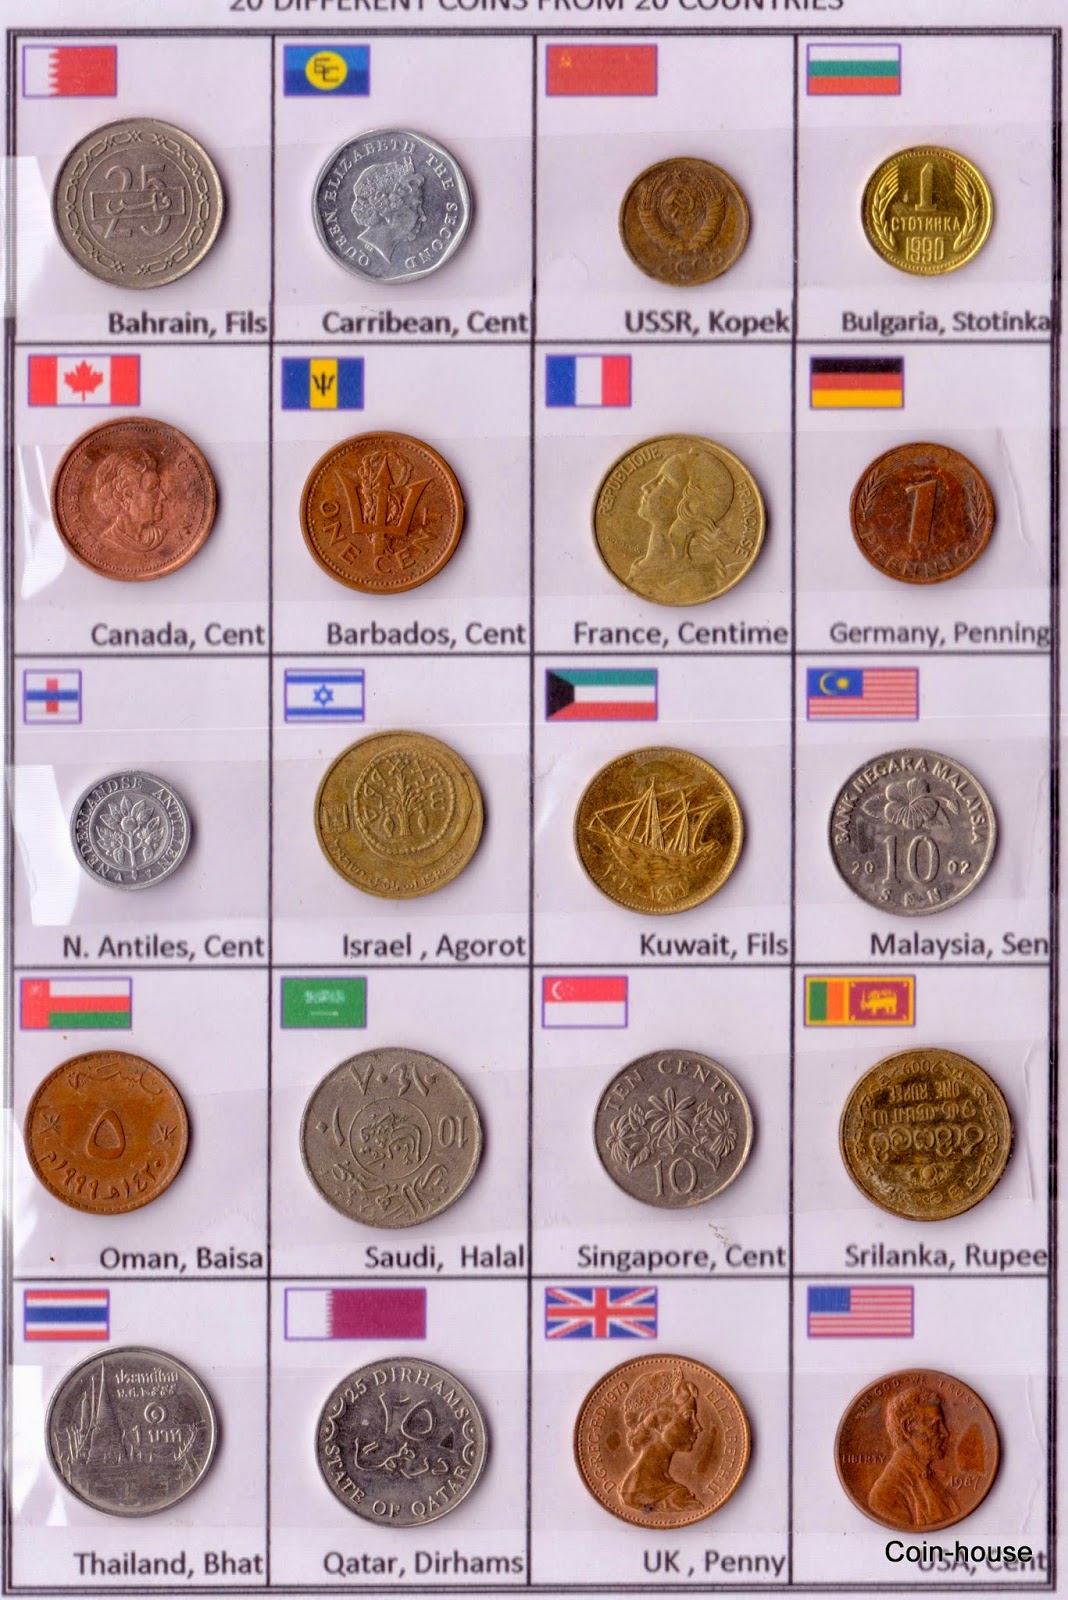 Coin-House: 20 World Coins from 20 Different Countries